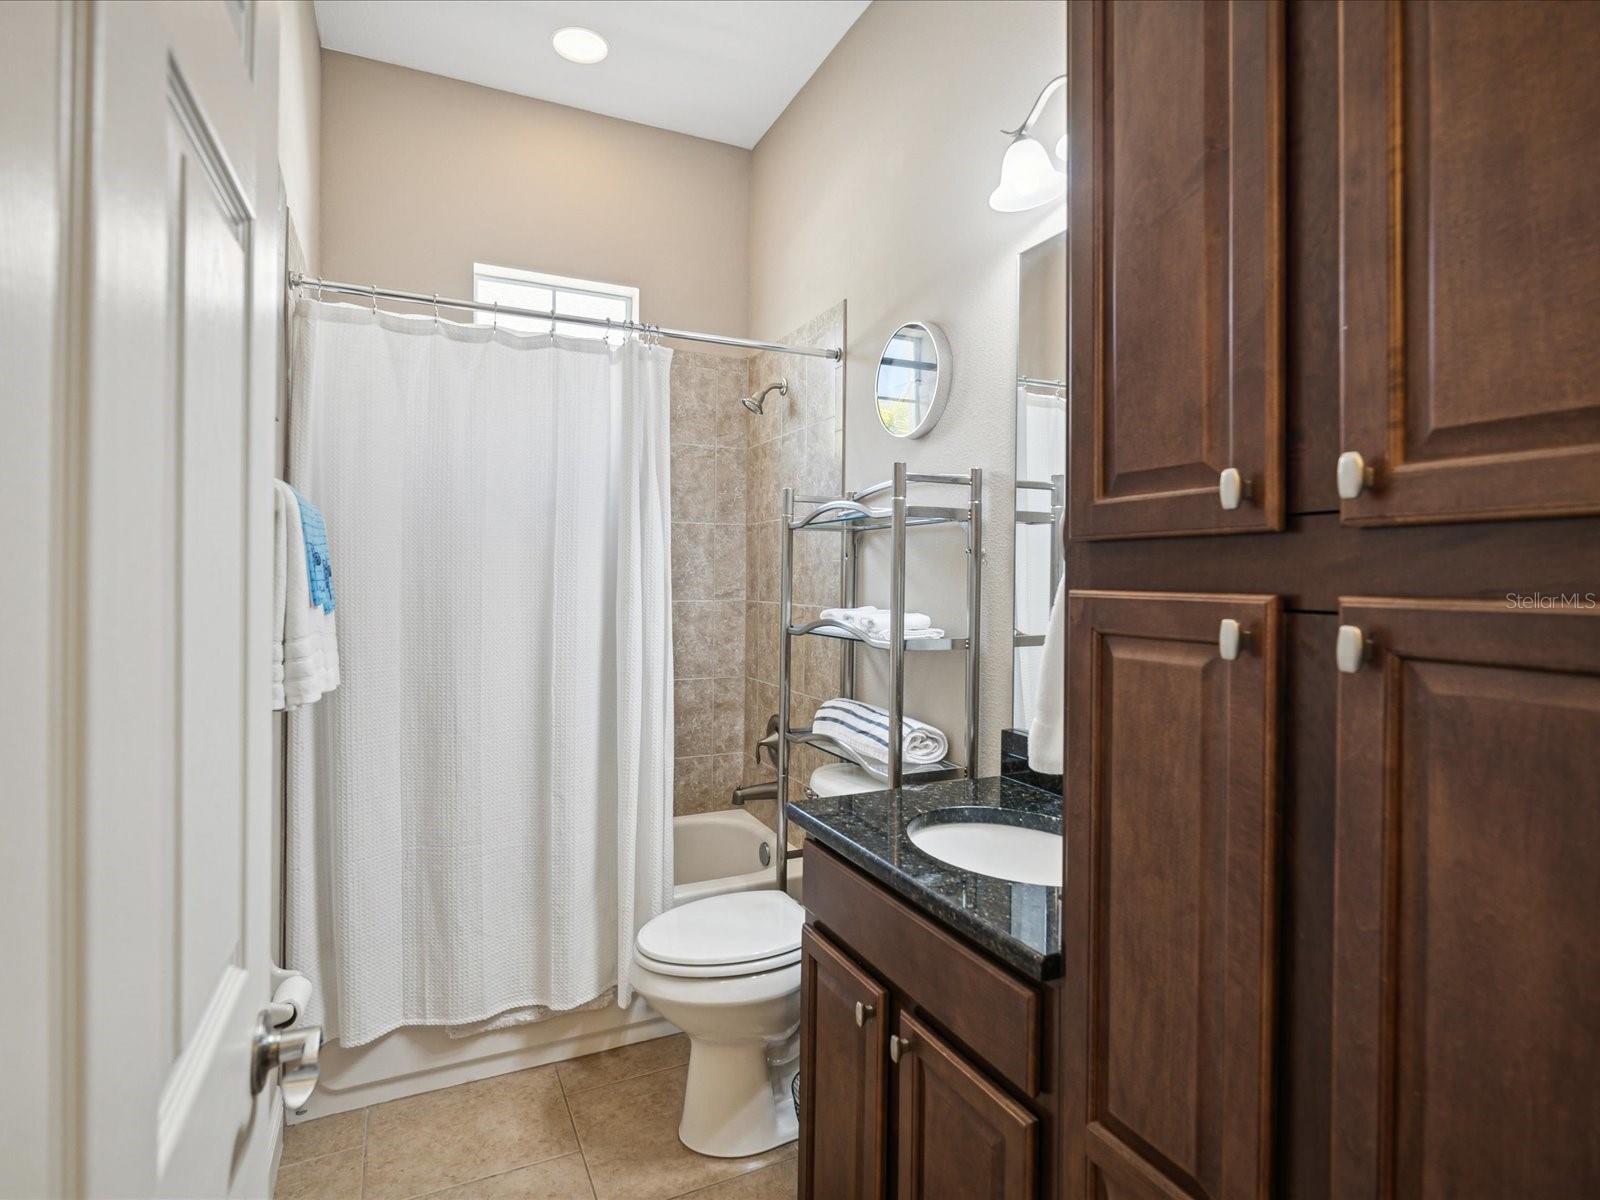 This bathtub shower combination includes granite counters and lots of built-in cherry cabinetry for storage.